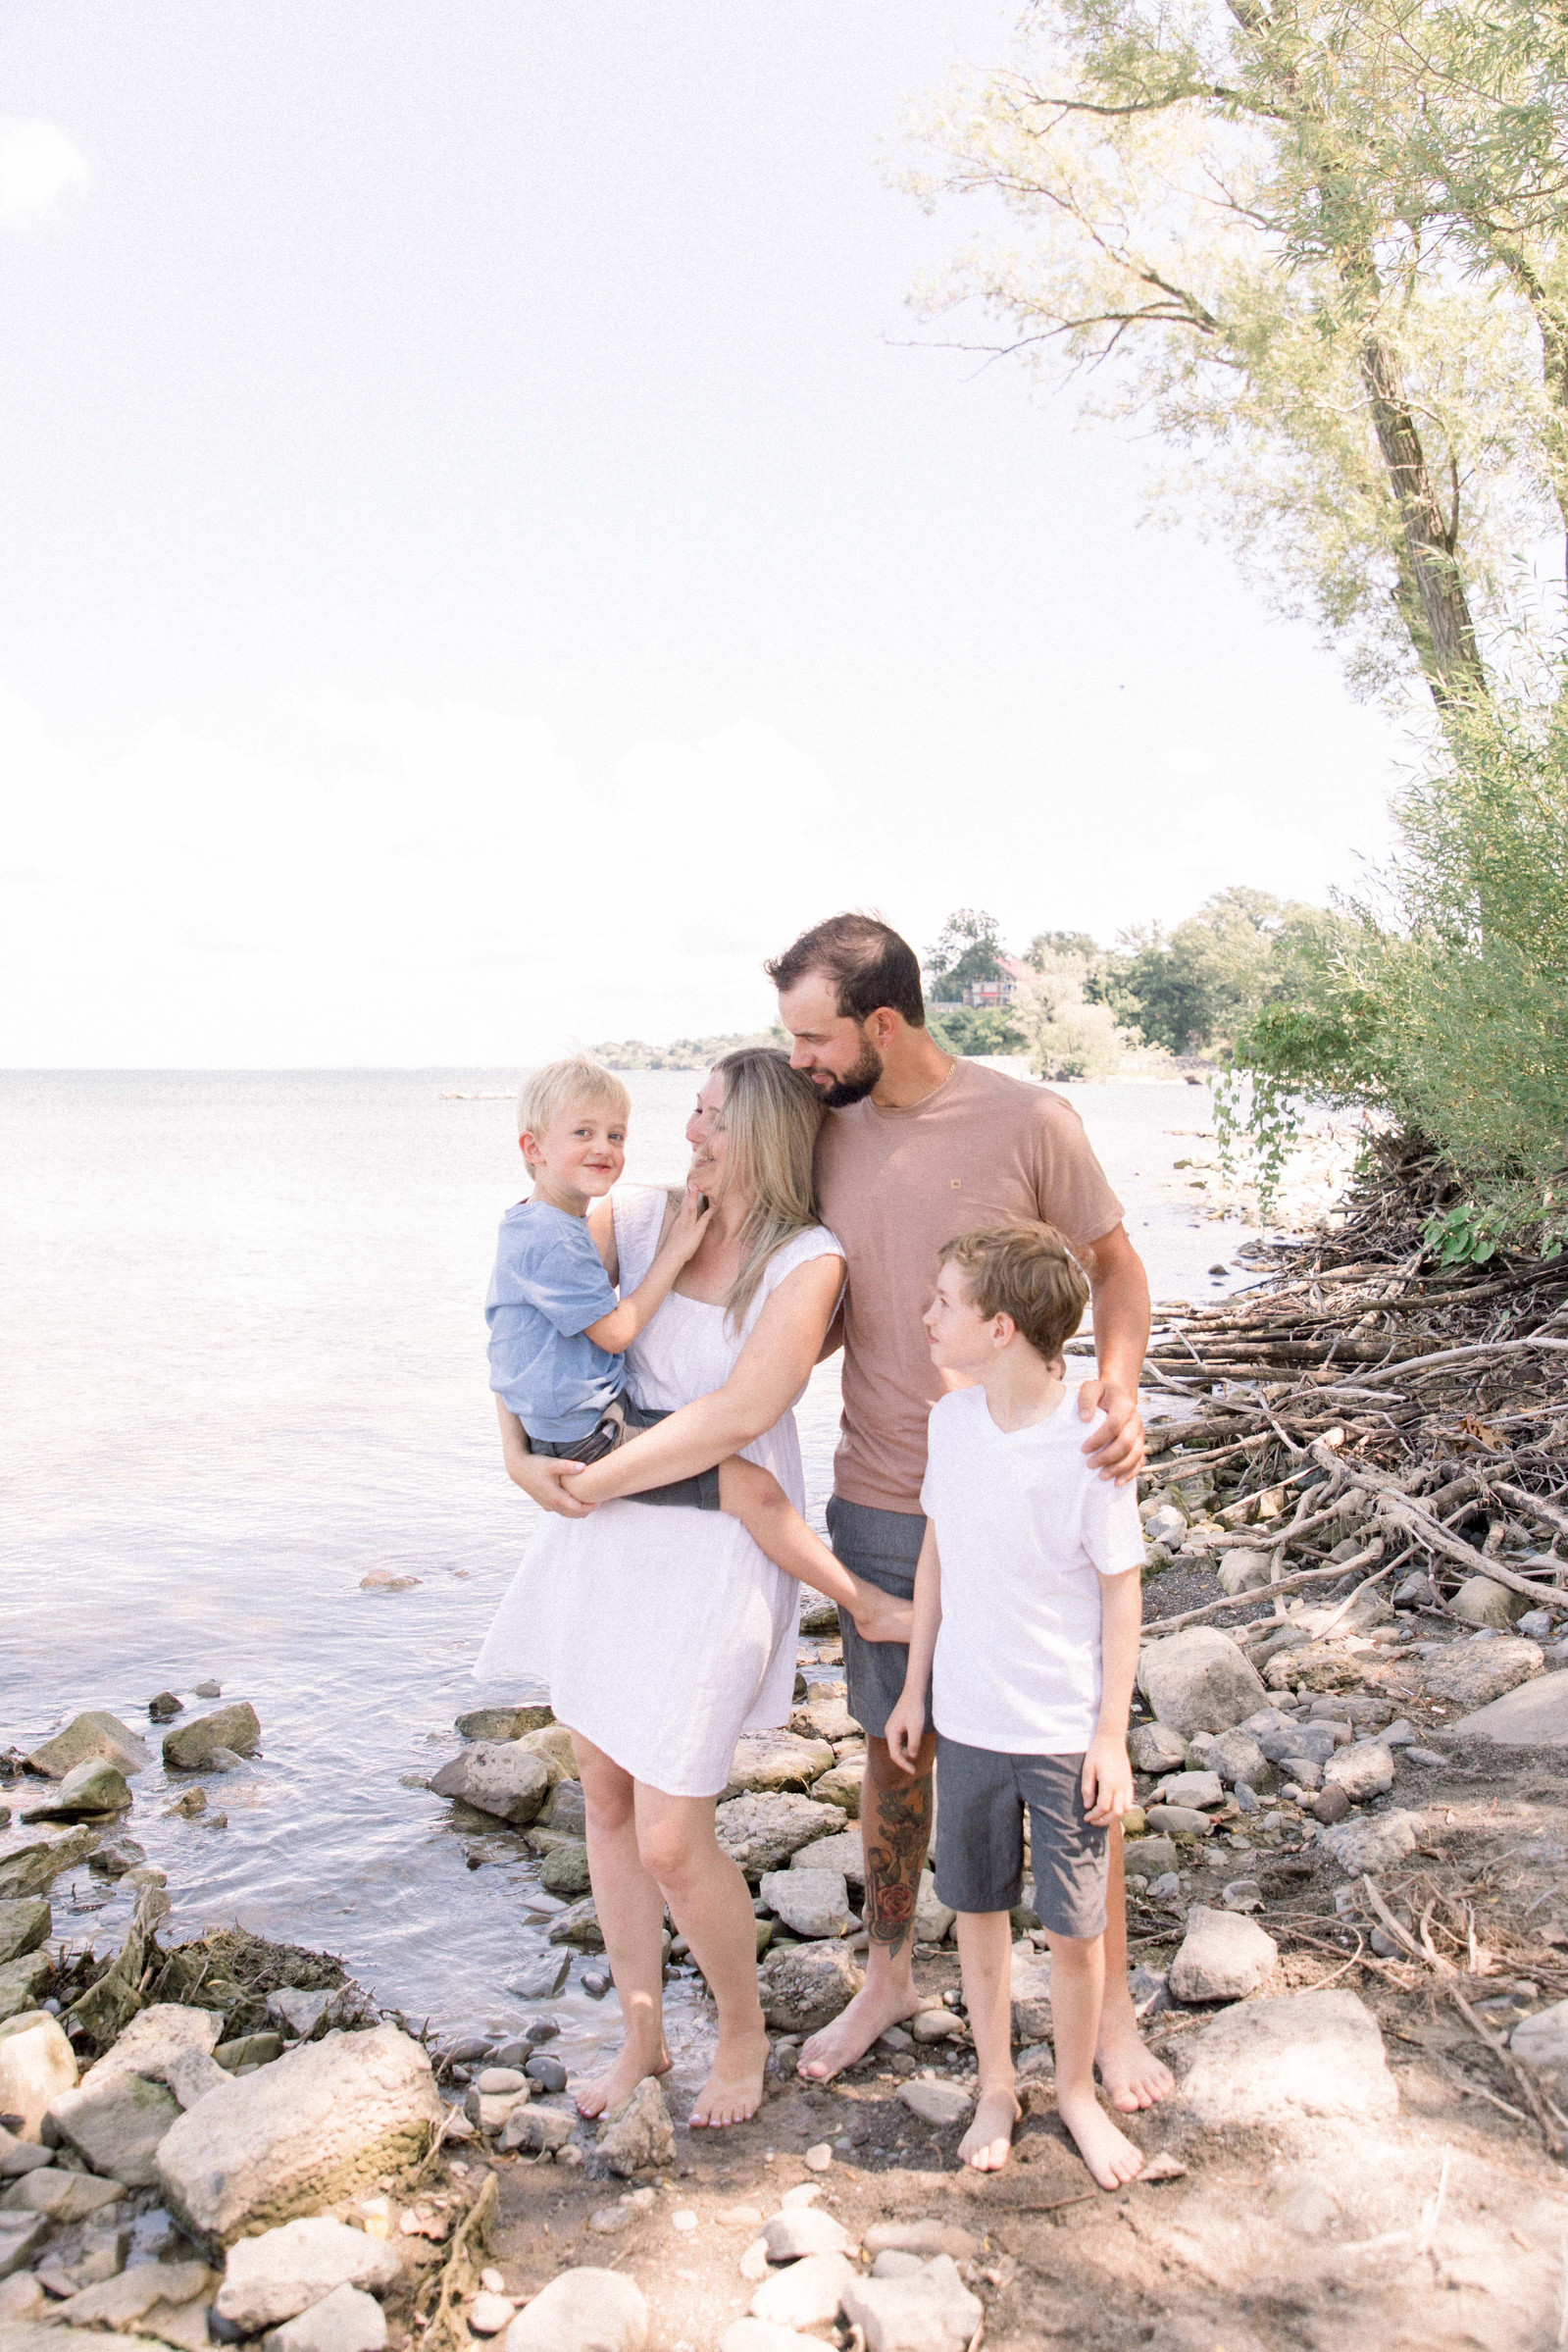 Portrait of family standing together at the beach. Niagara family photographer, Niagara portrait photographer, Niagara motherhood photographer, candid photography, light & airy photography, Emily VanderBeek Photography.